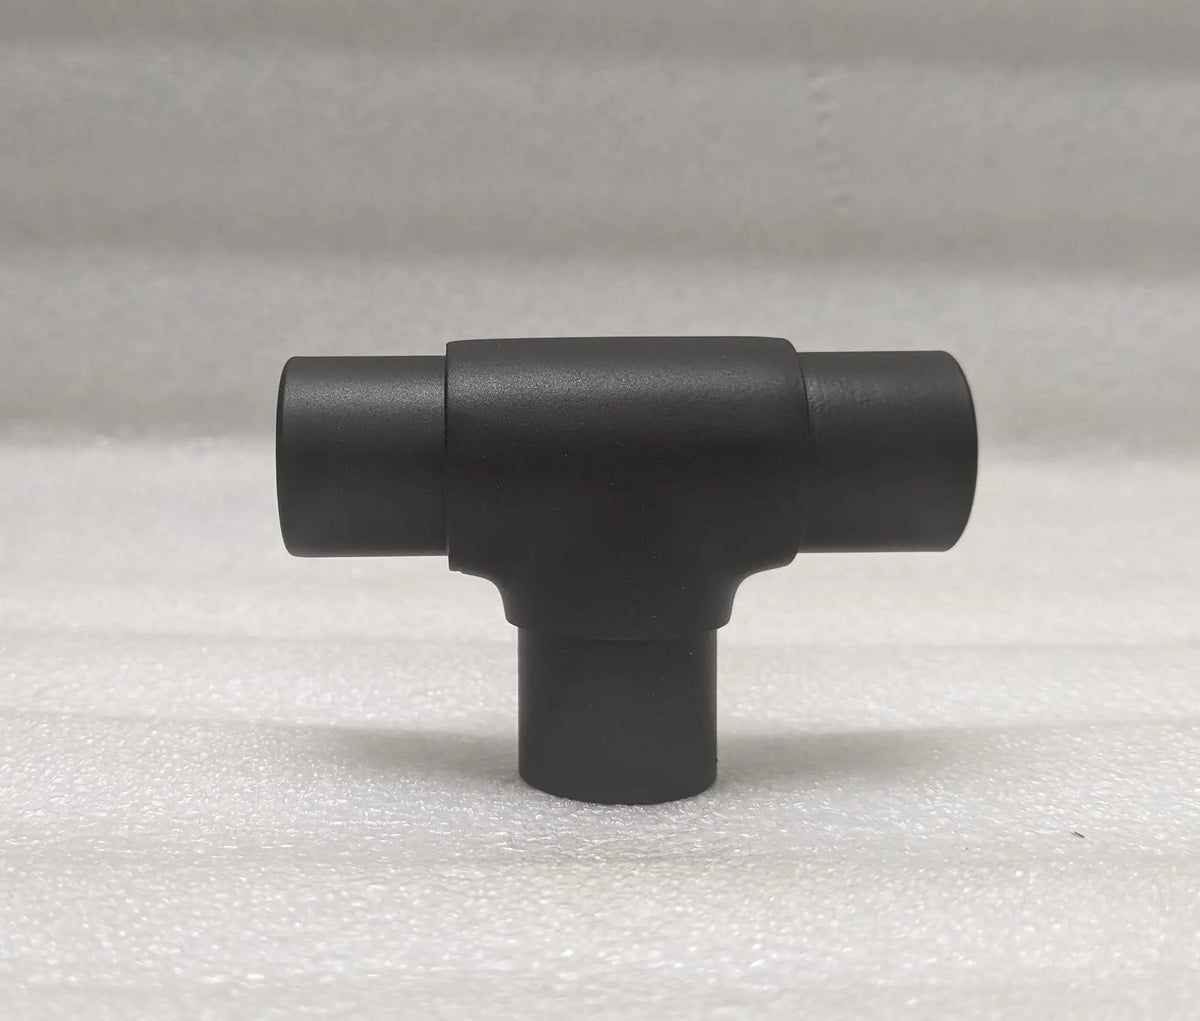 Flush Tee for 1" Tubing FLUSH FITTING,COMPONENTS FOR 1-1/2" OD TUBING MatteBlackPowderCoatedFinish Trade Diversified